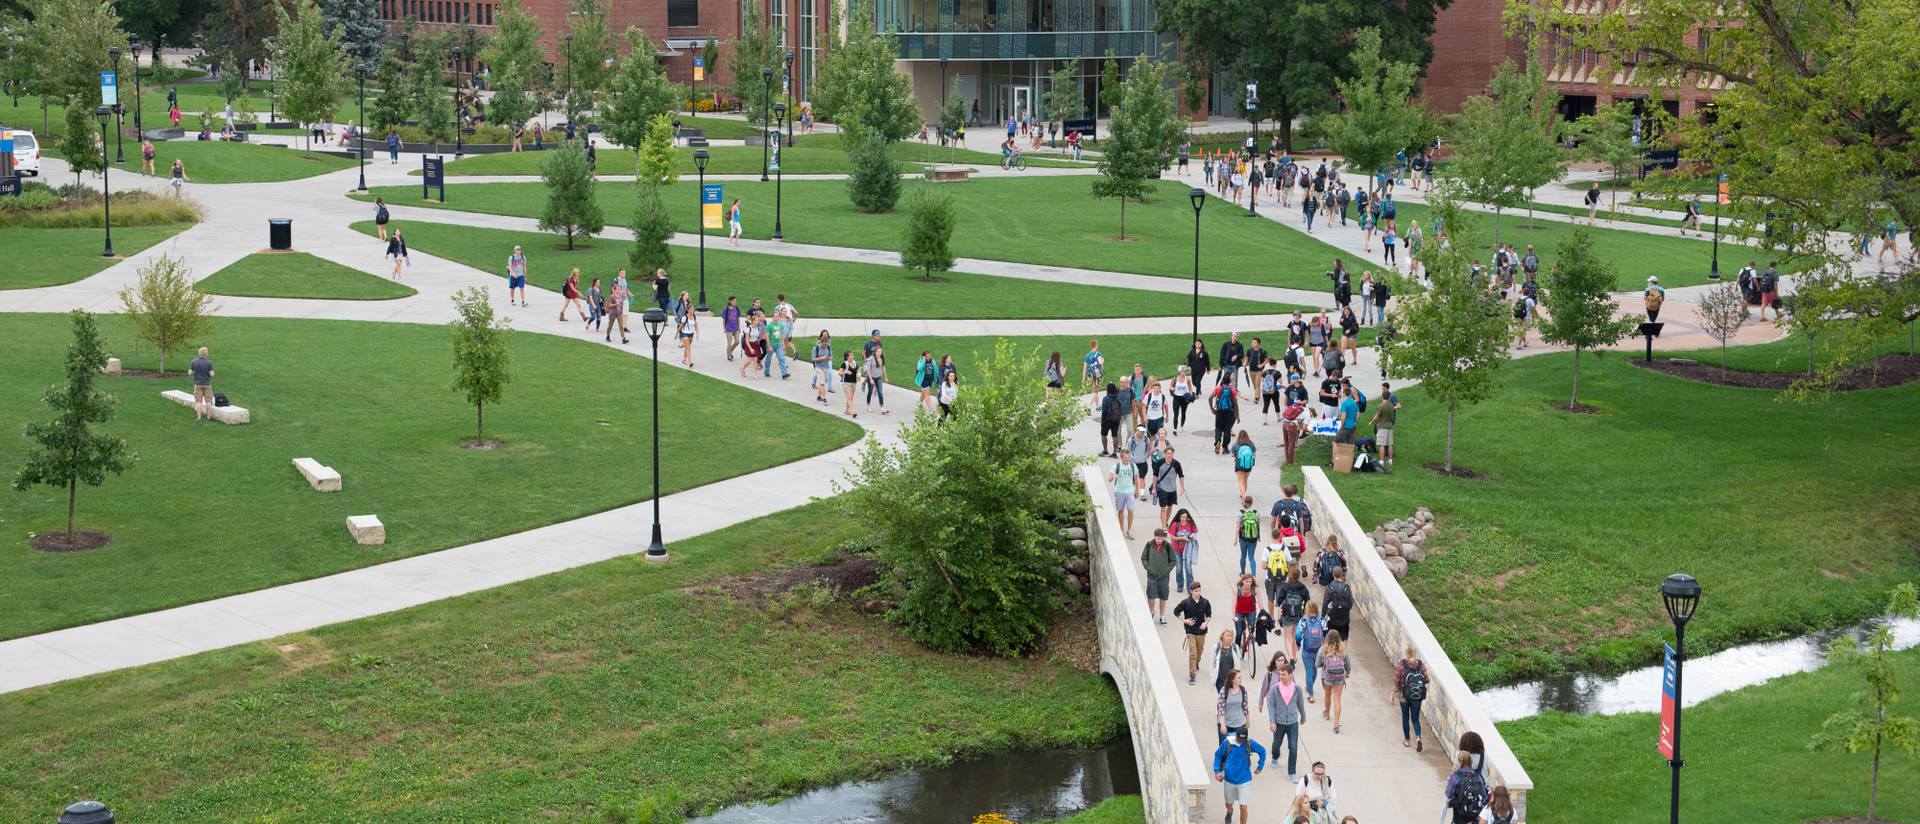 Students walking across campus mall